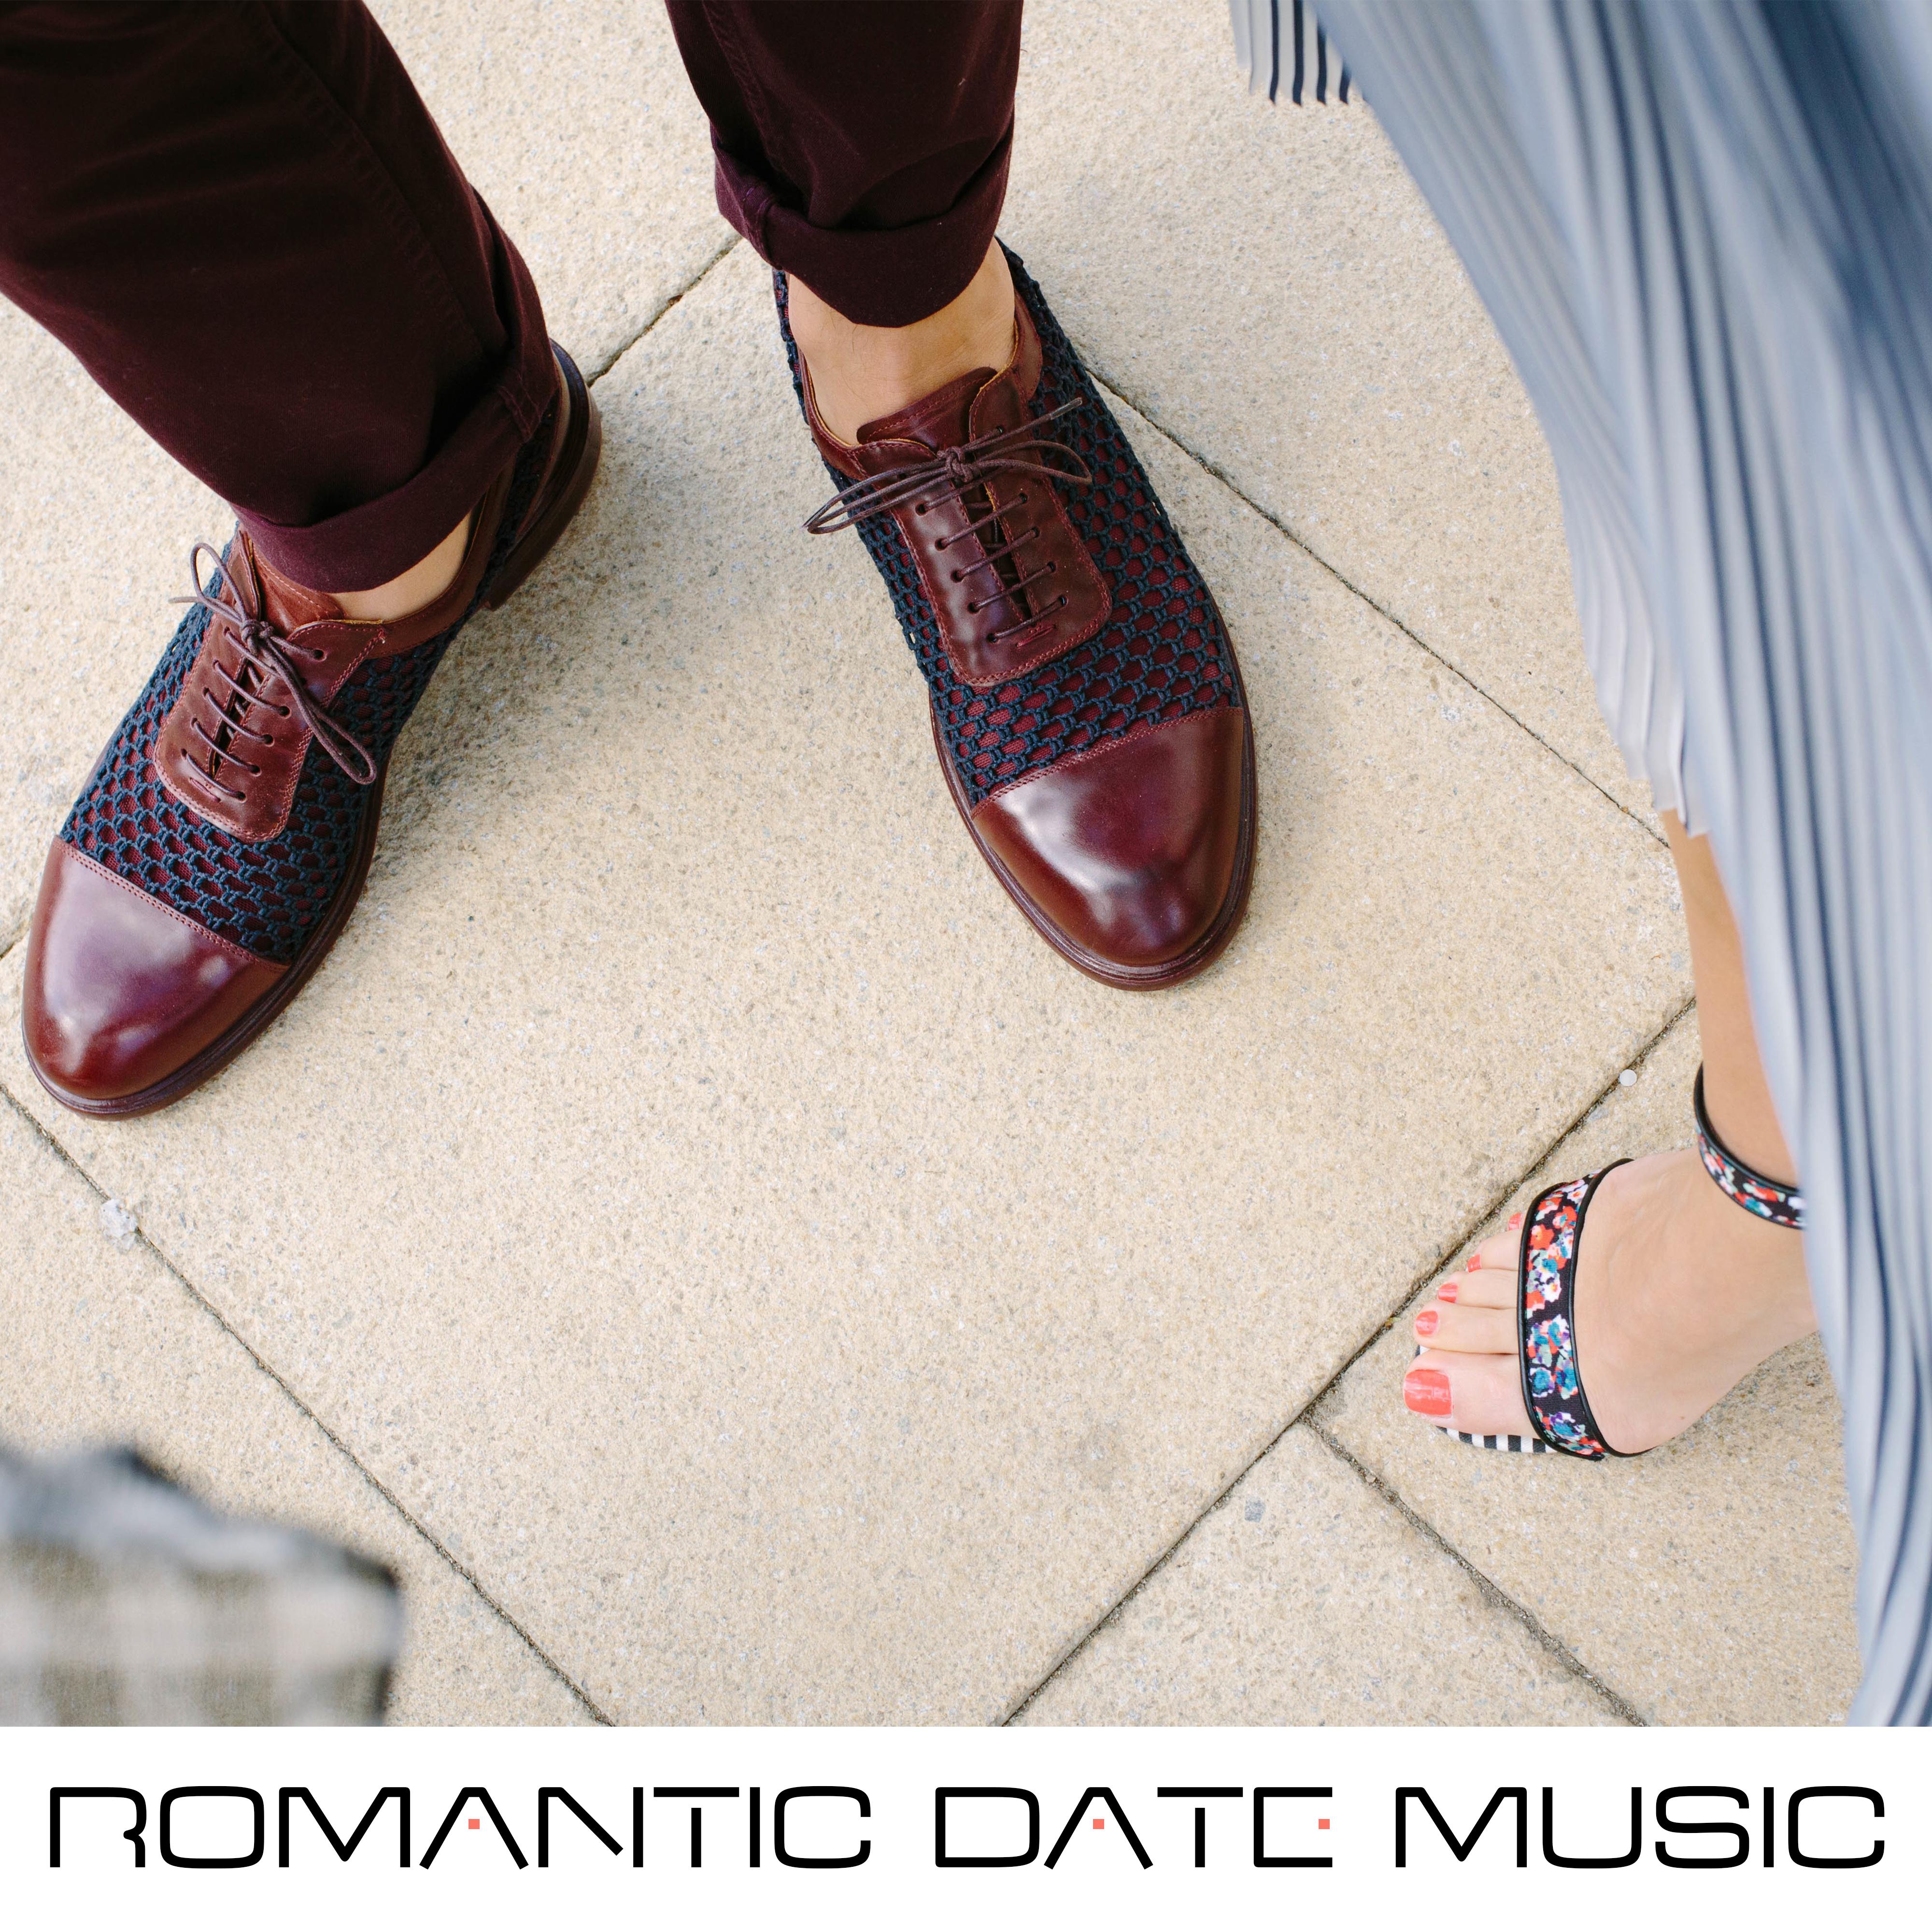 Romantic Date Music – Calming Sounds, Restaurant Background Music, Smooth Jazz, Candle Light Dinner